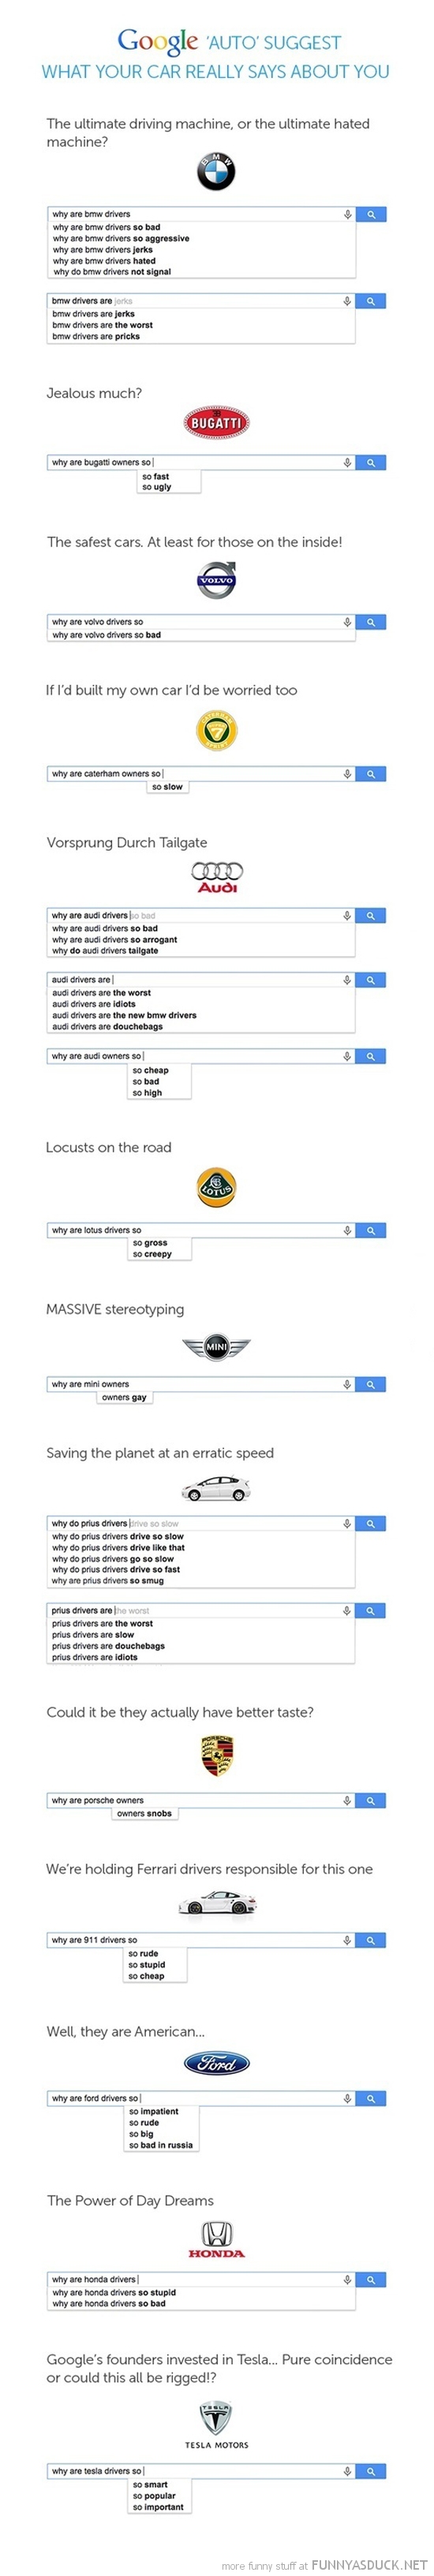 What Your Car Says About You